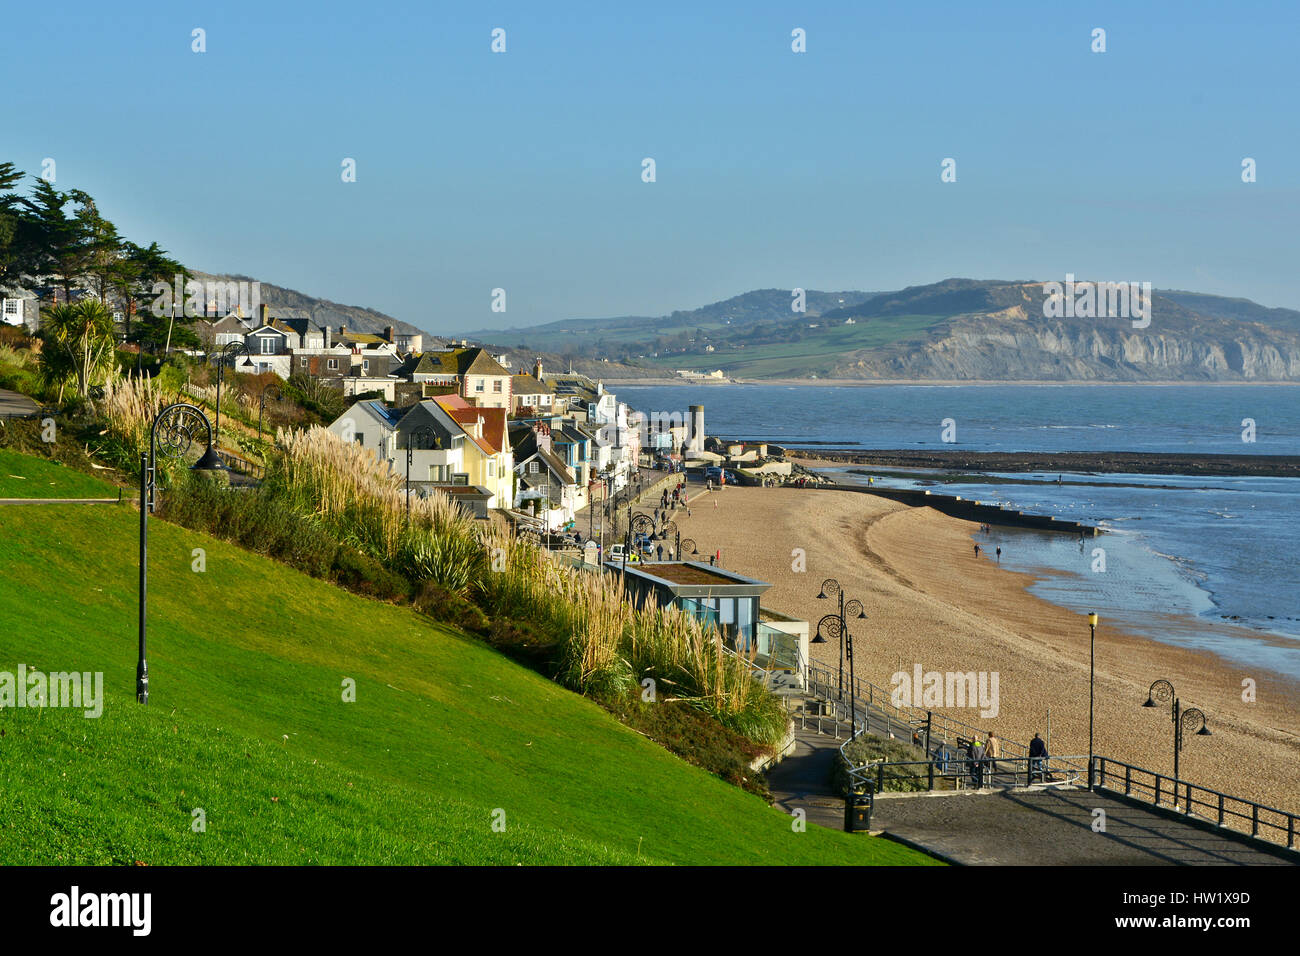 View Of The Coast Town Of Lyme Regis In Dorset, UK Stock Photo